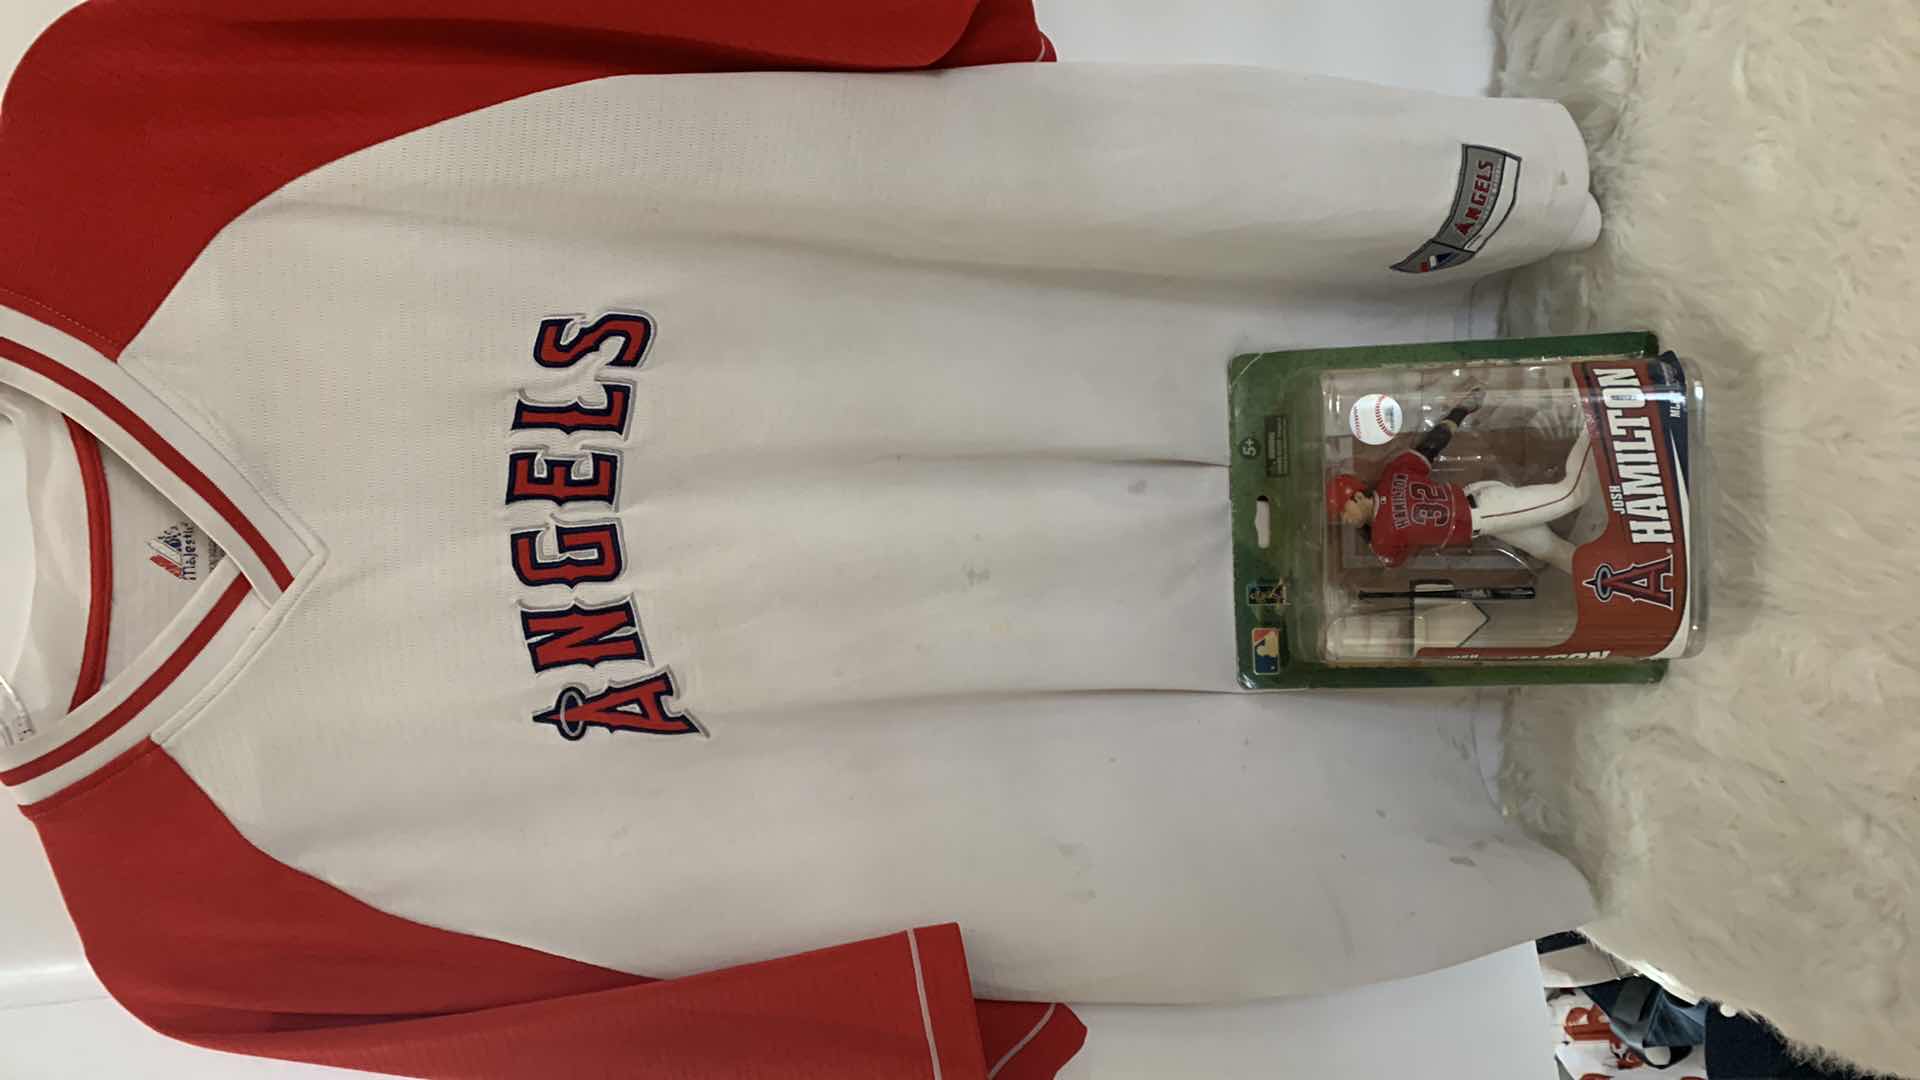 Photo 1 of ANGELS BASEBALL JERSEY SIZE XL AND NEW JOSH HAMILTON COLLECTIBLE FIGURINE